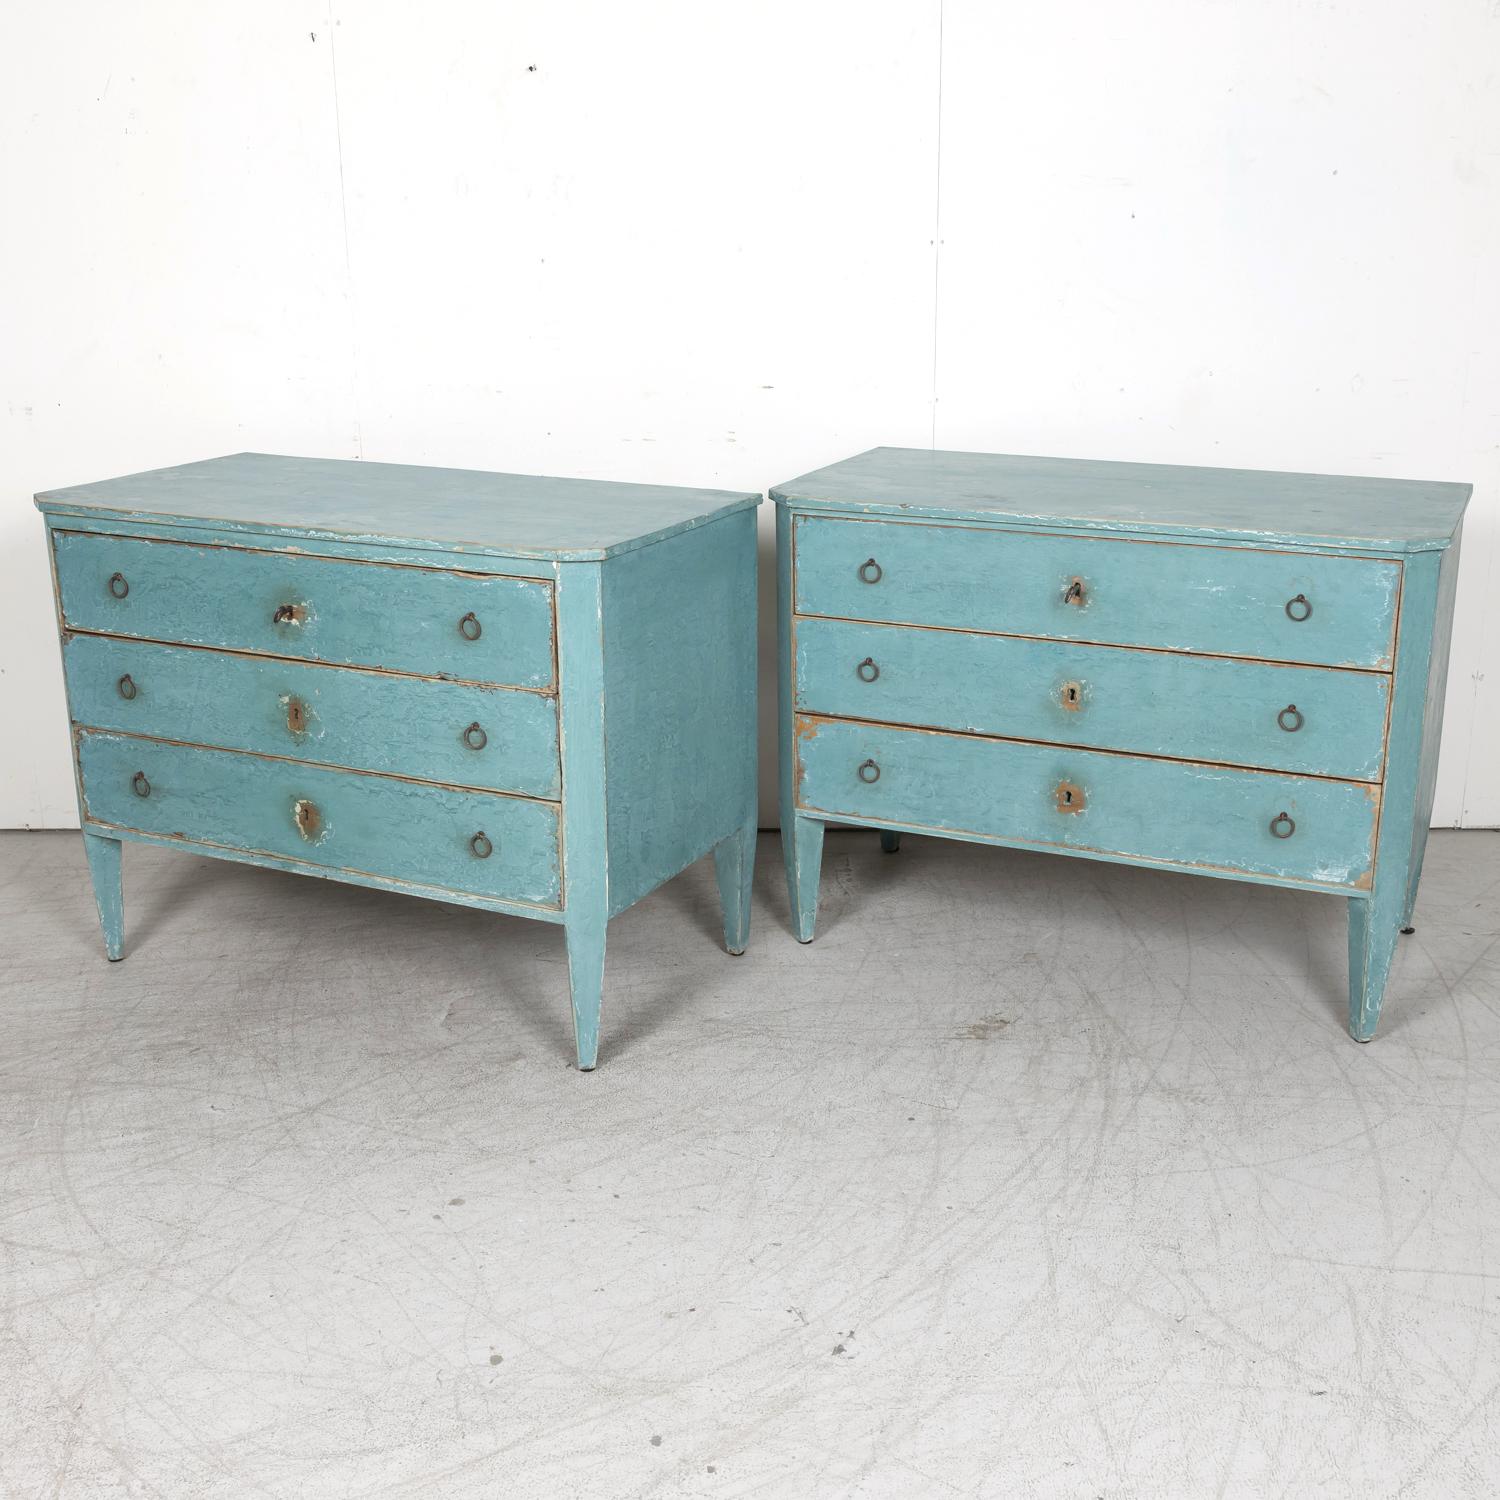 Hand-Painted Pair of Late 19th Century French Louis XVI Style Aqua or Teal Painted Commodes